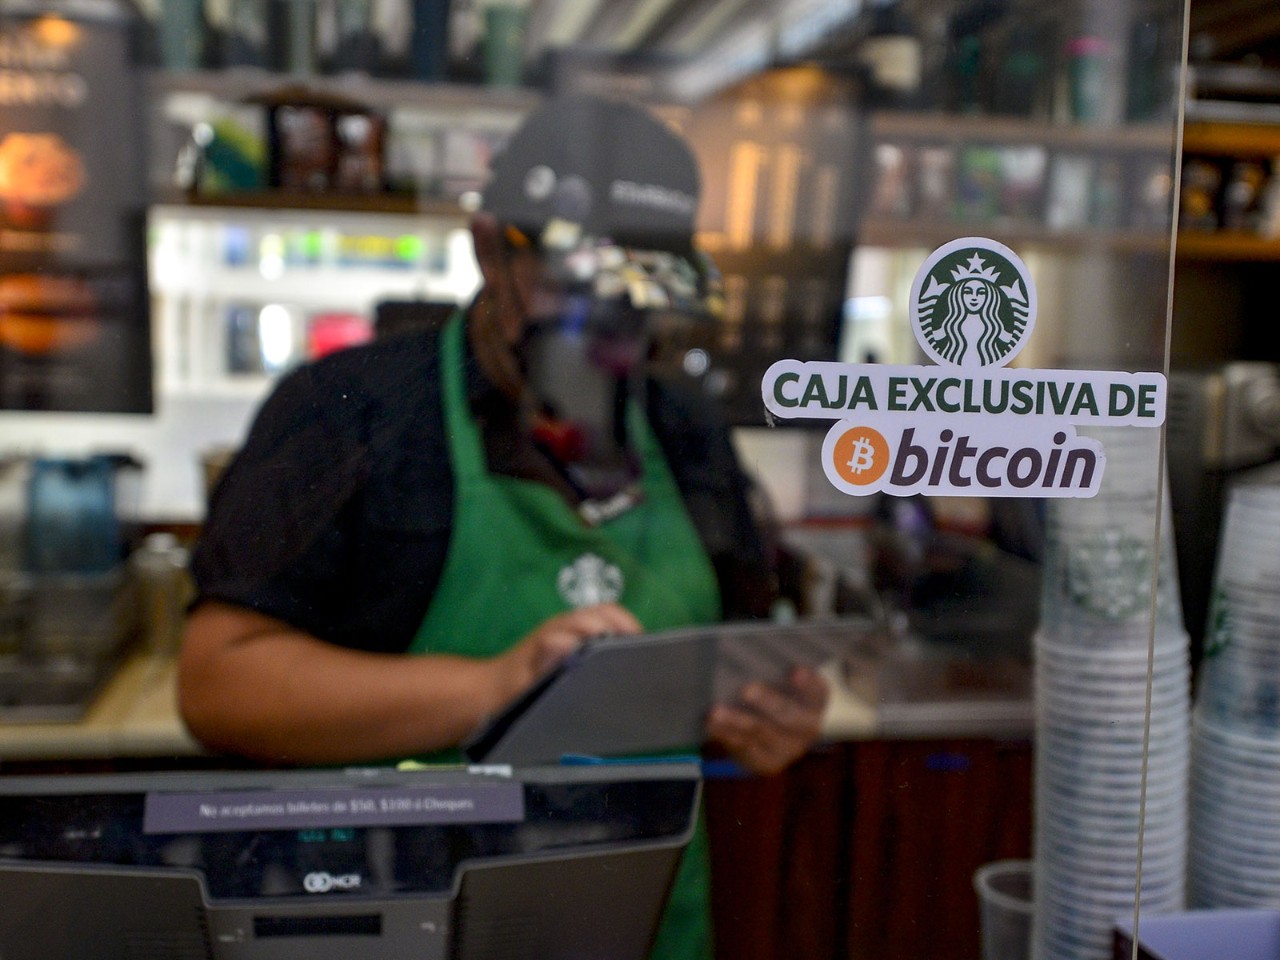 El Salvadorian businesses have begun accepting Bitcoin payments, including multinationals like Starbucks